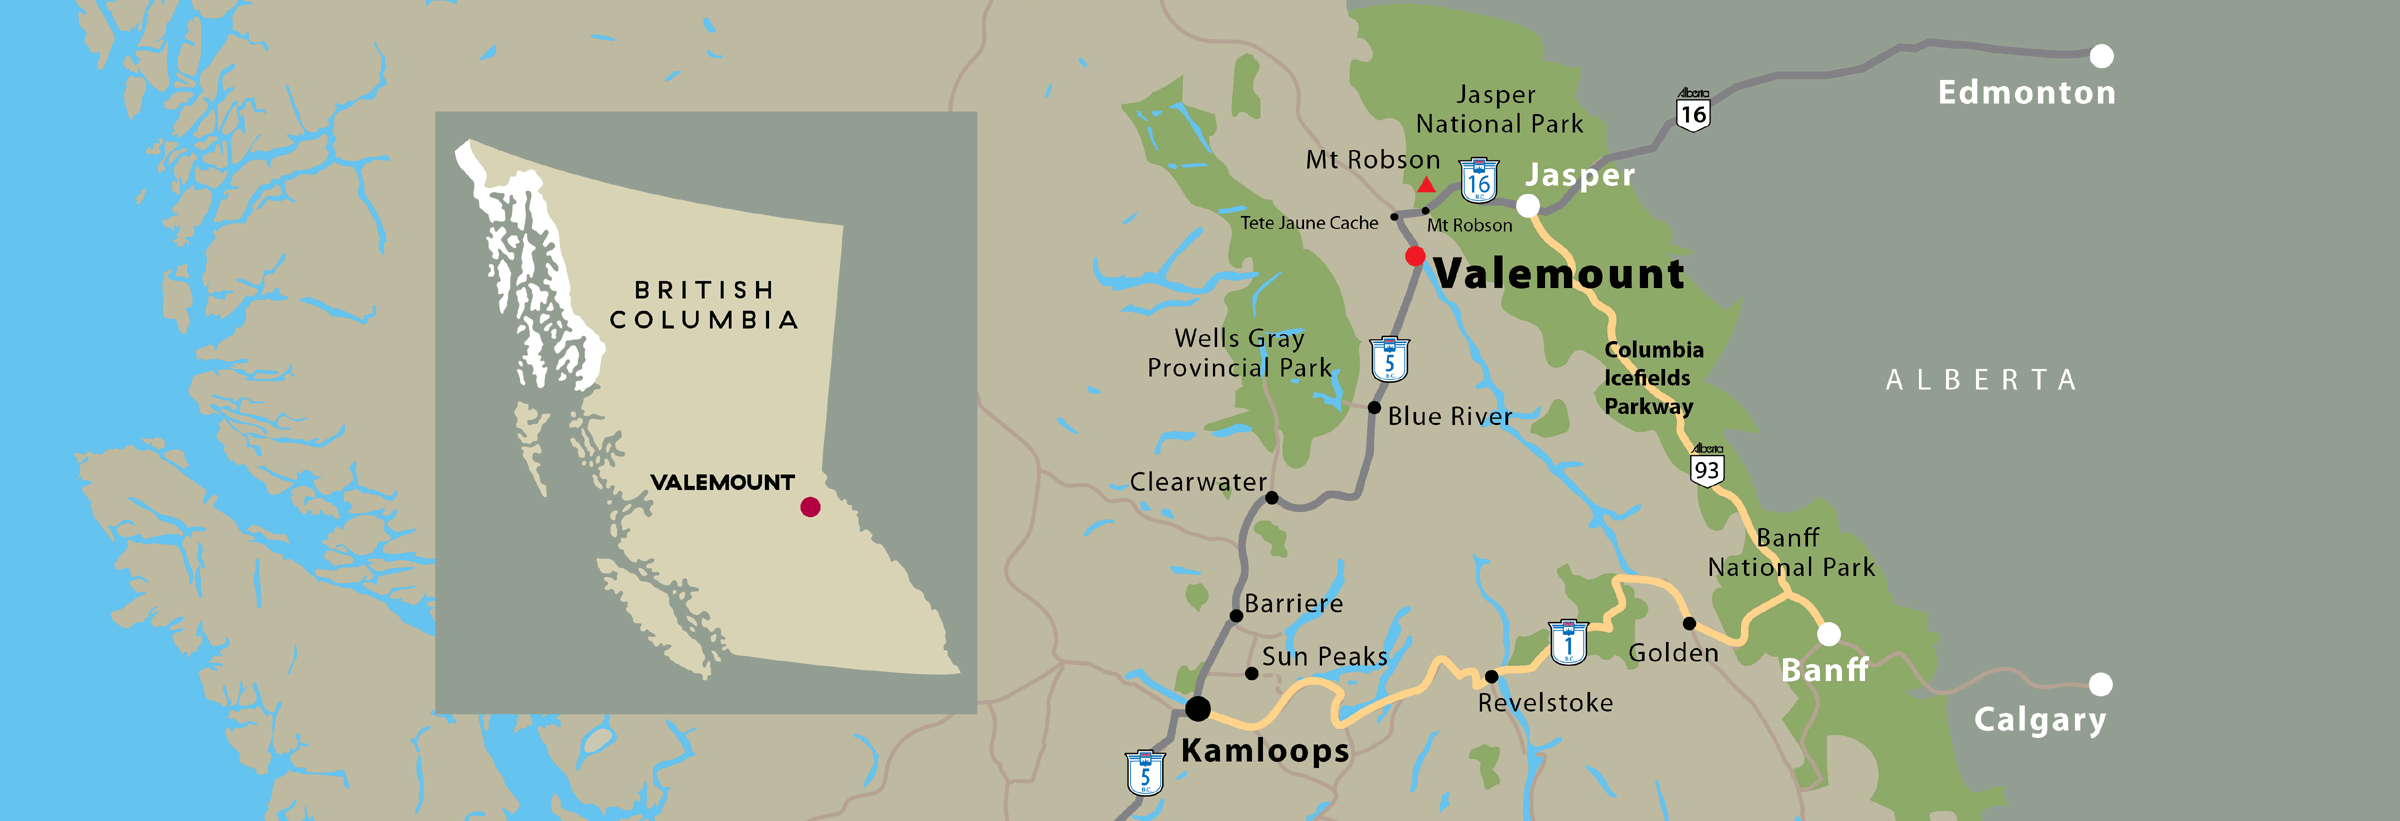 Overview map of Valemount and British Columbia